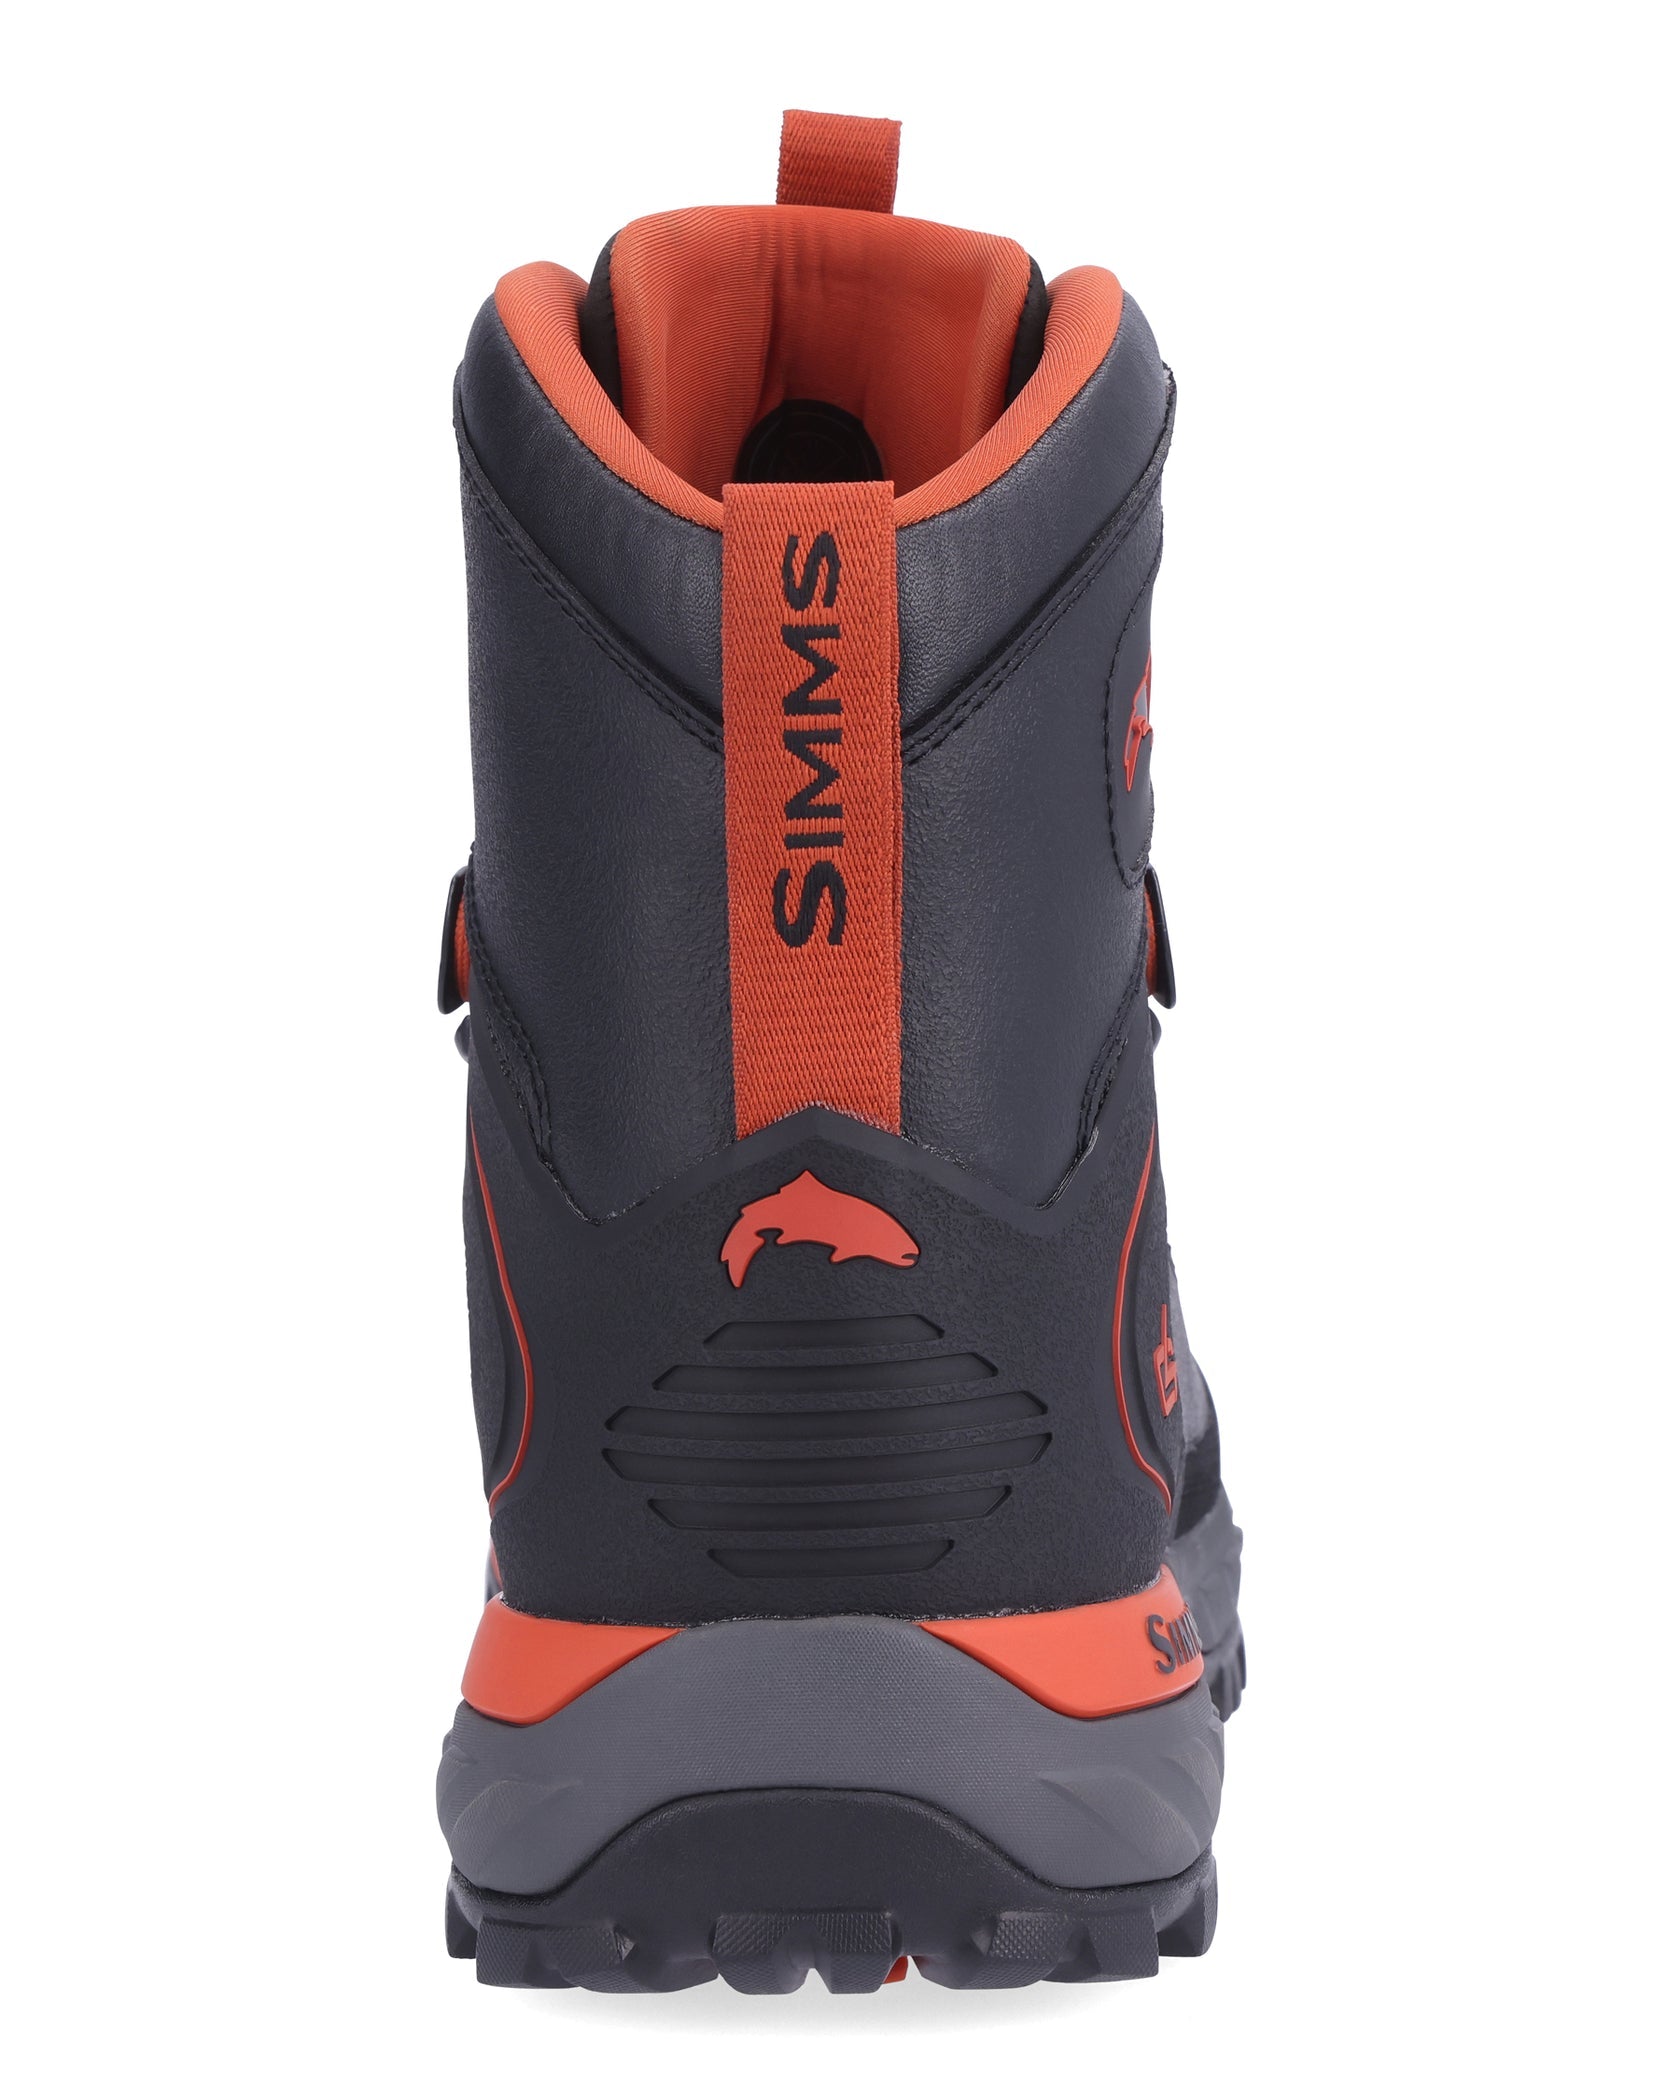 Simms G4 Pro Powerlock Wading Boots – charliesflybox